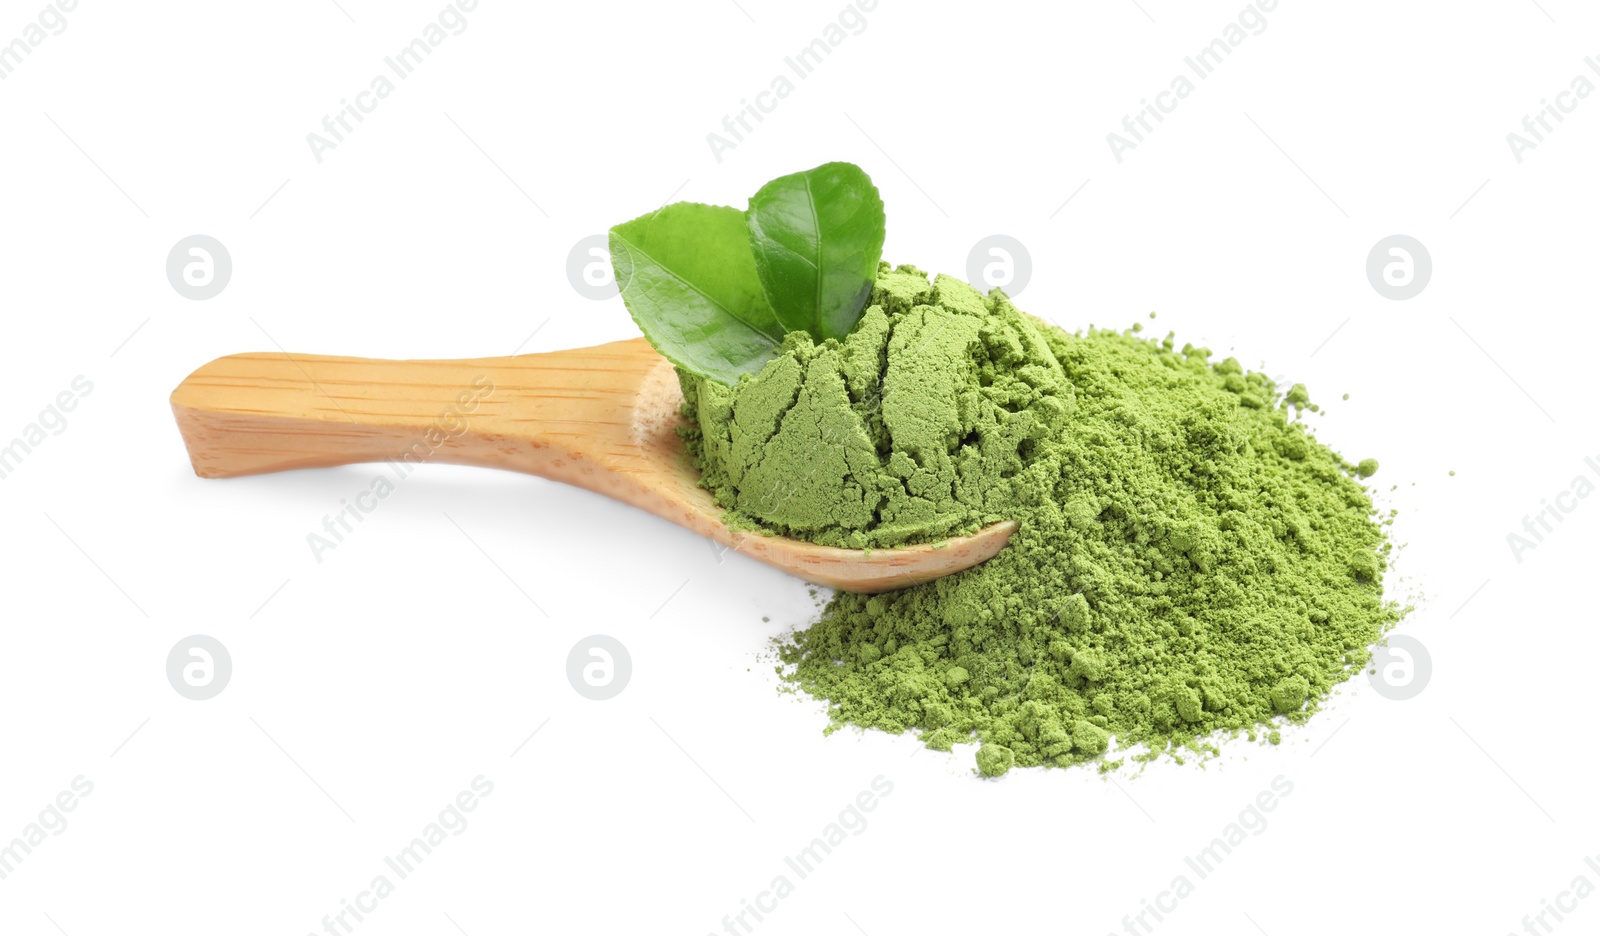 Photo of Wooden spoon with green matcha powder and leaves isolated on white